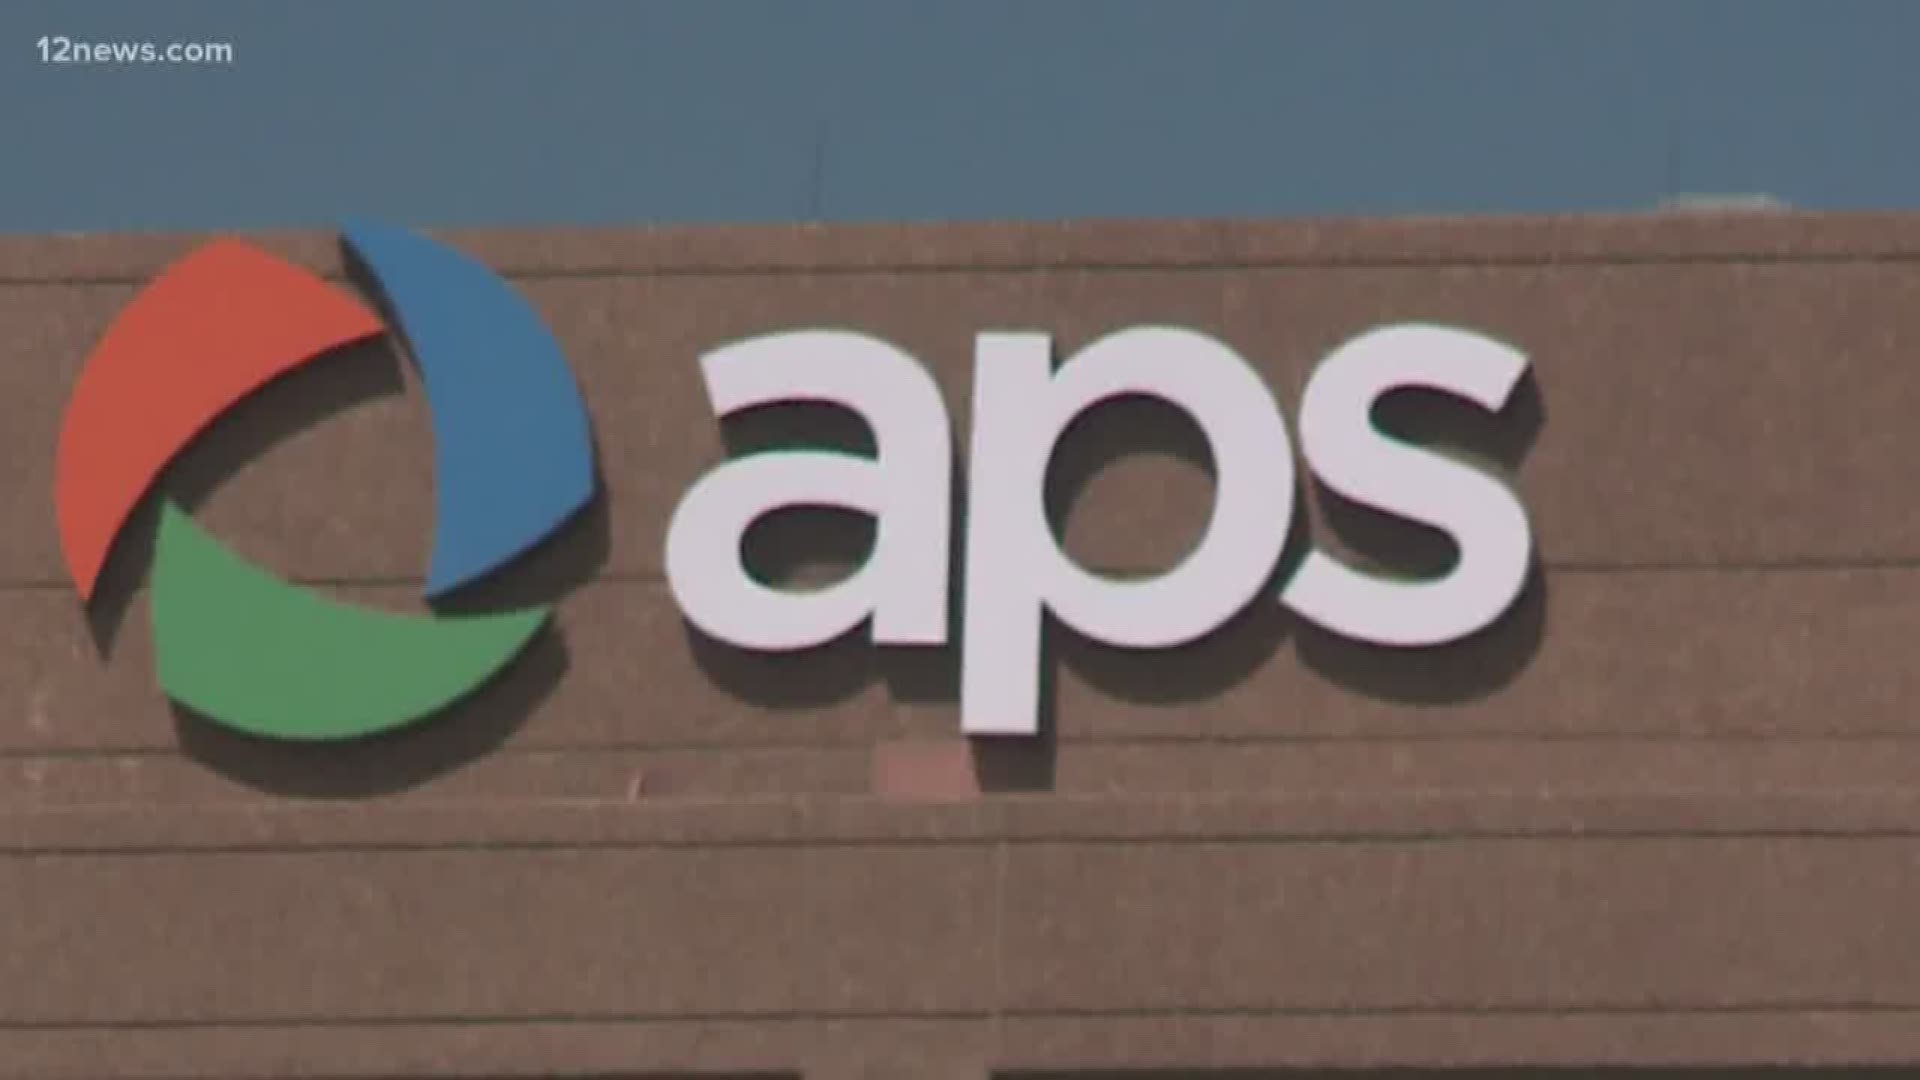 The body that regulates APS, the Corporation Commission, removed data that showed how many customers had their power shut off from its utility report. After critics said it was wrong to remove the data the commission tells 12 News they will put that data back into the report.